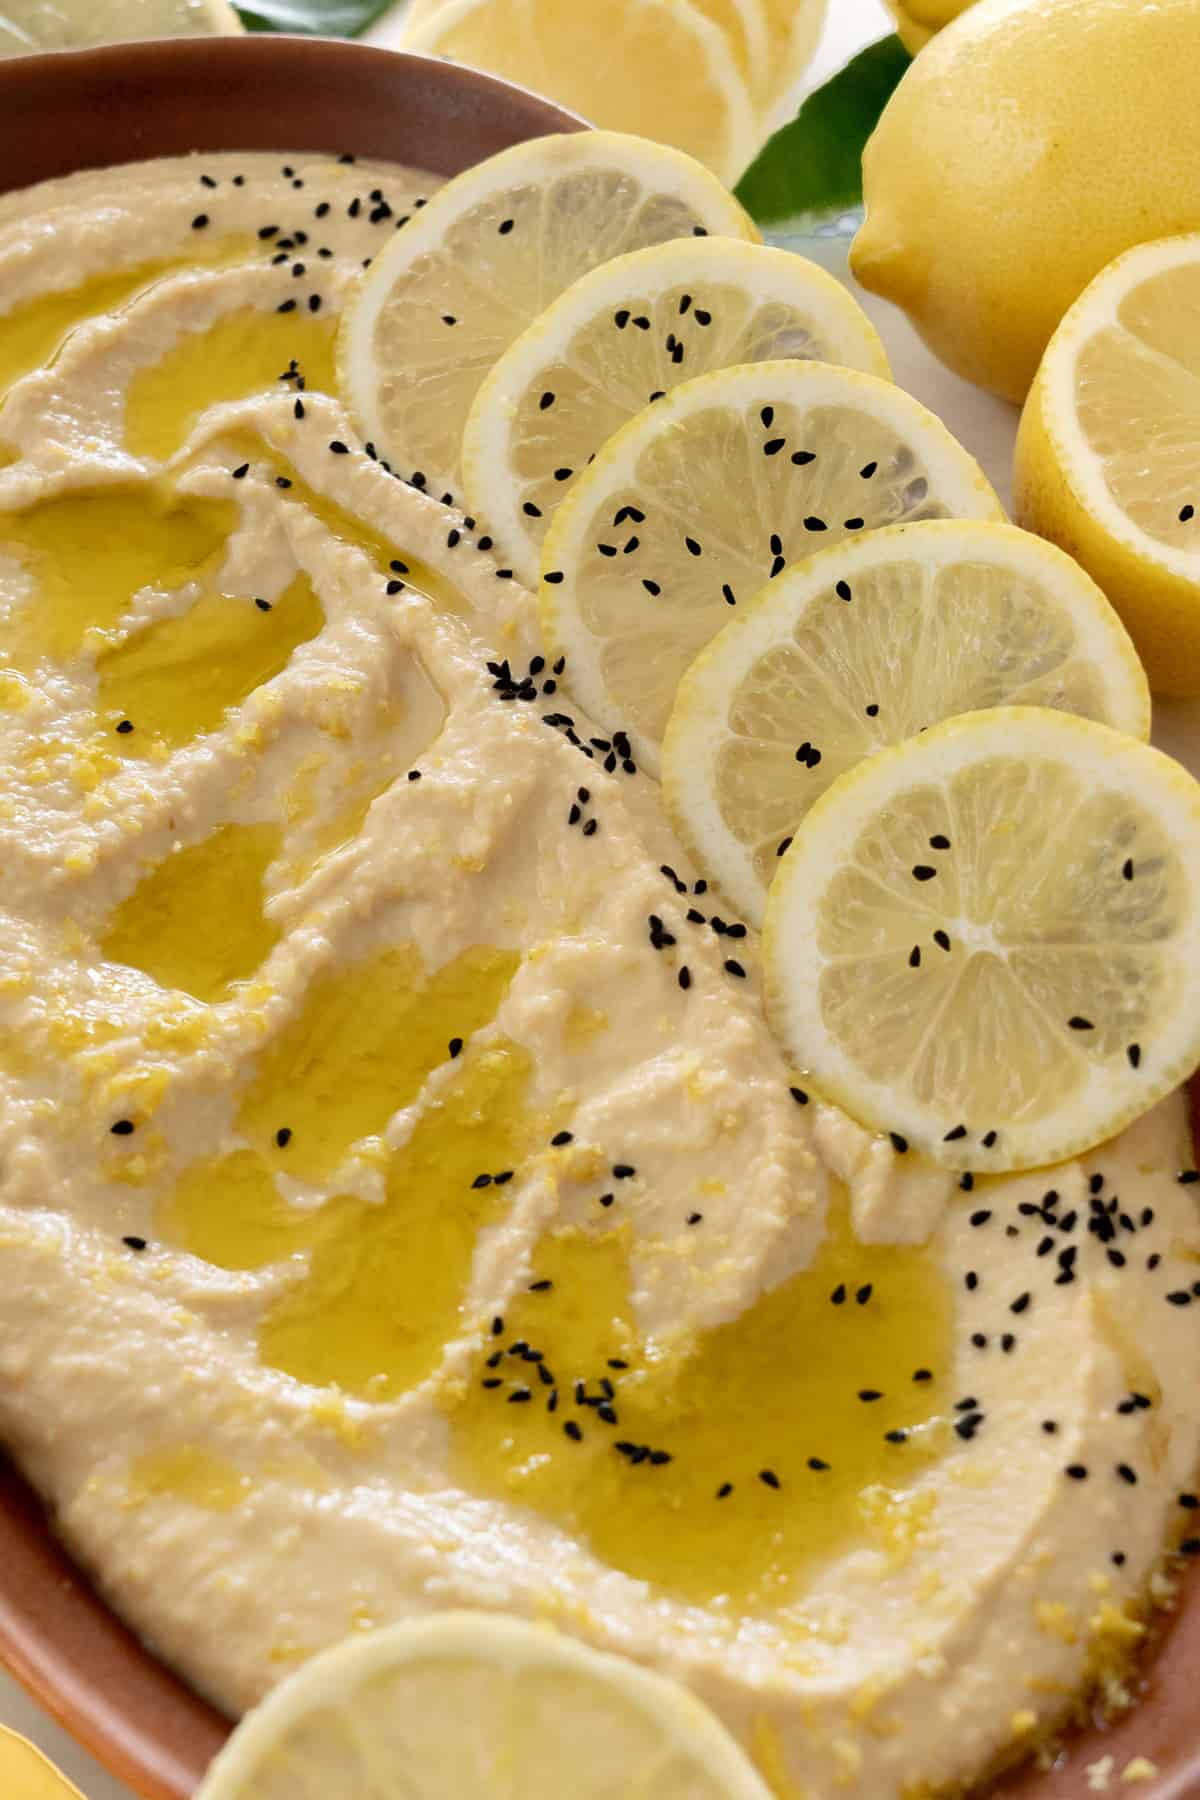 a plate of lemon hummus wth black seeds on top surrounded by lemons